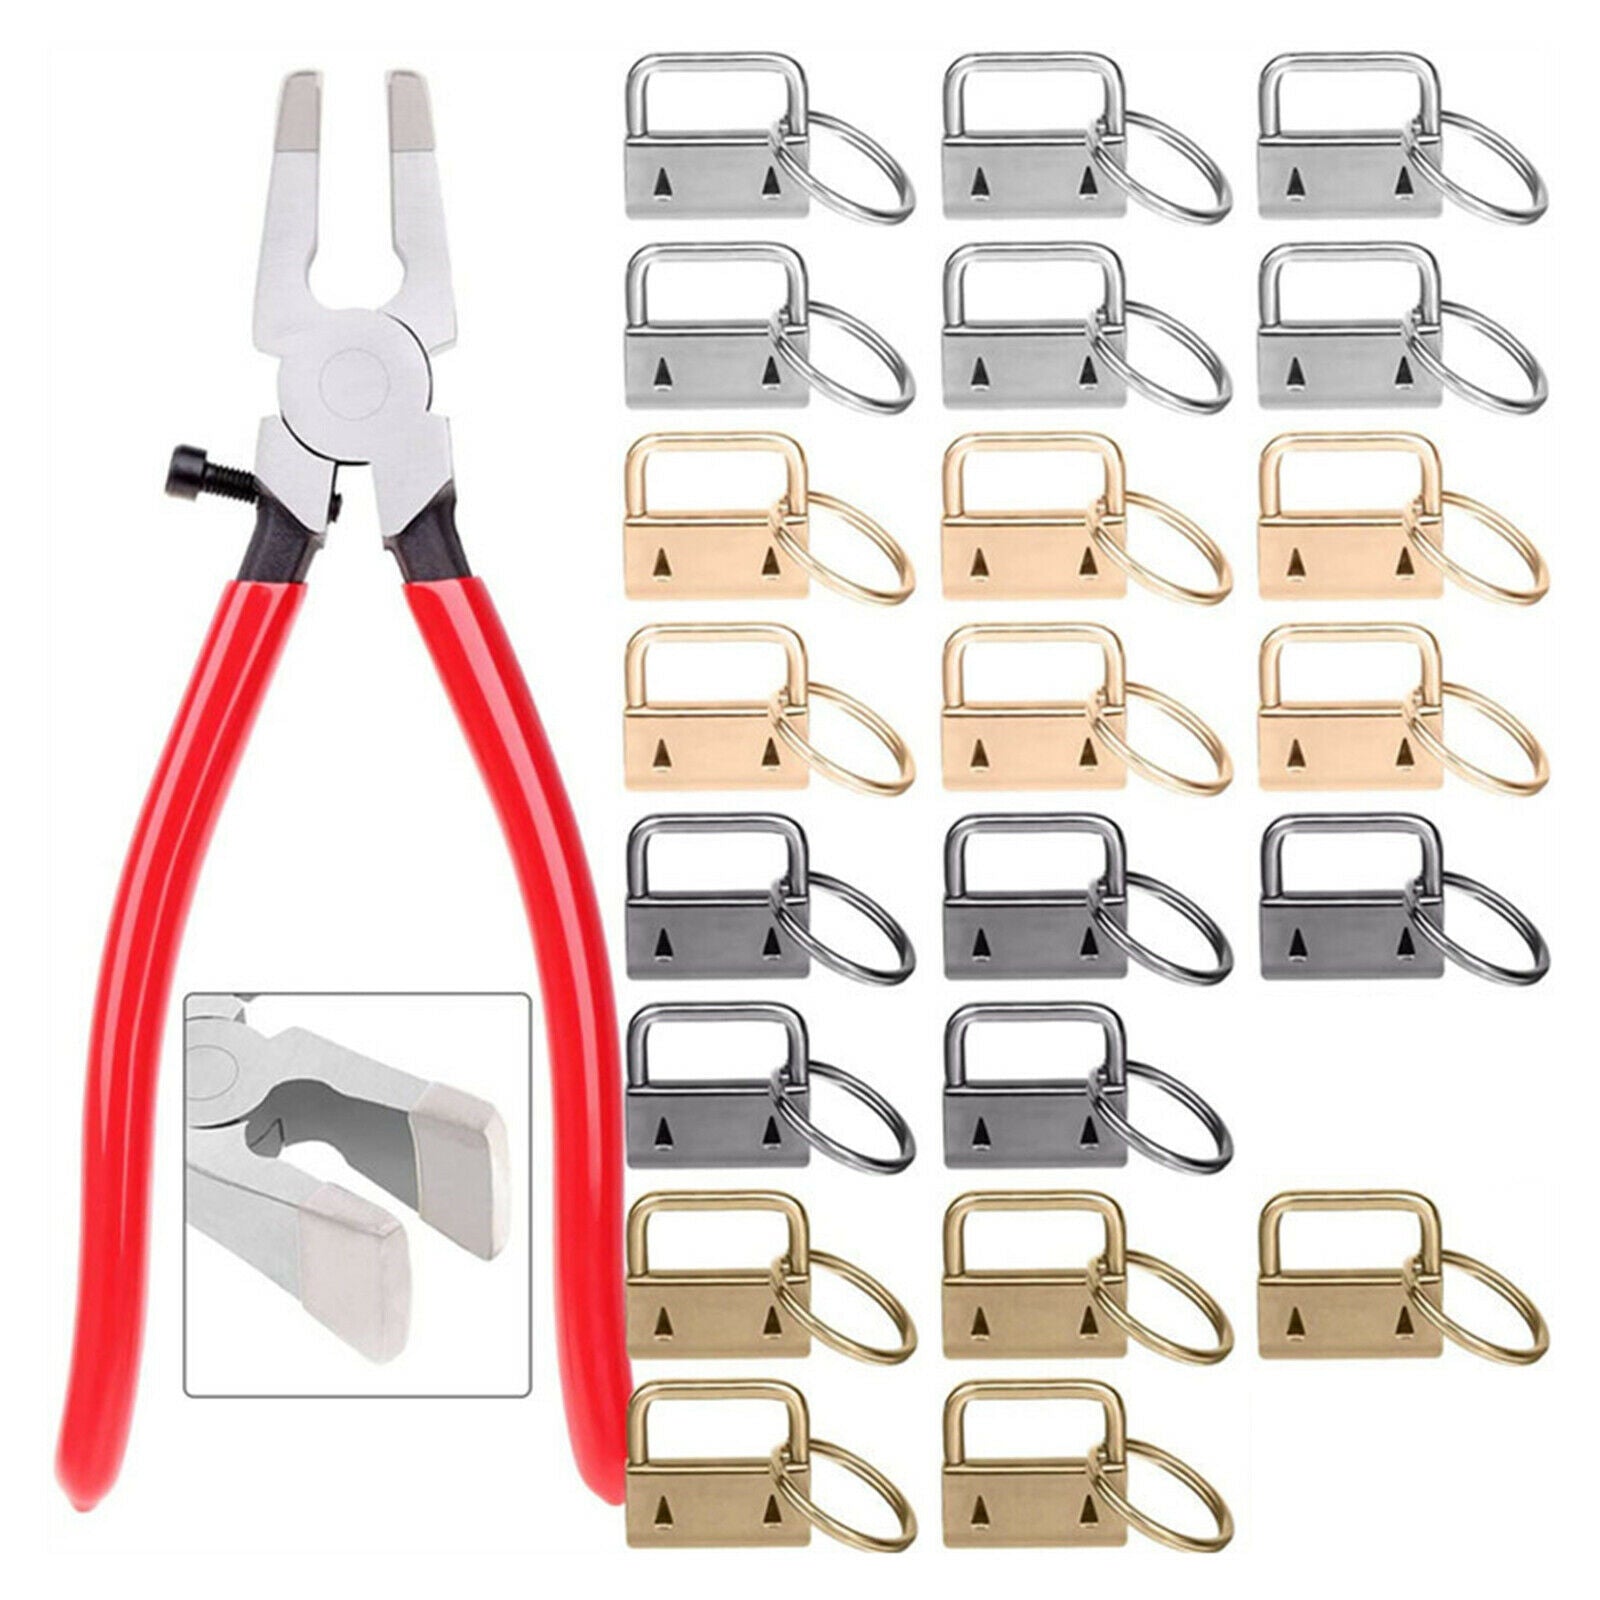 Key Fob Hardware 22PCS 1 Inch Glass Running Pliers Tool for Wristlet Clamp